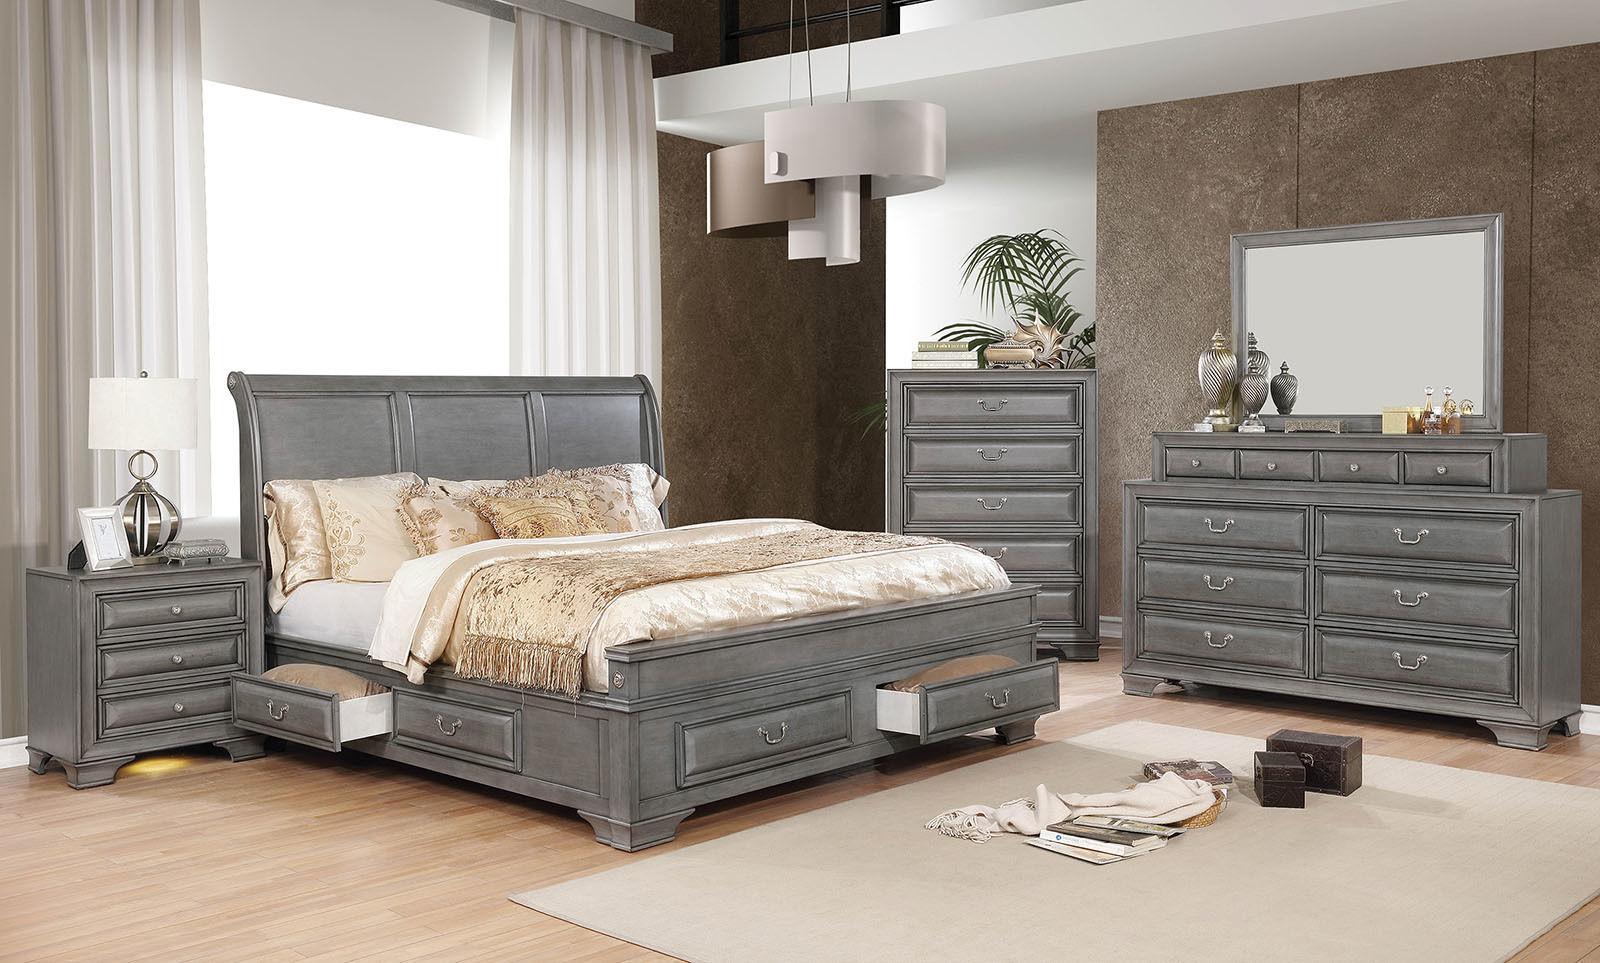 Transitional Storage Bedroom Set CM7302GY-Q-5PC Brandt CM7302GY-Q-5PC in Gray 